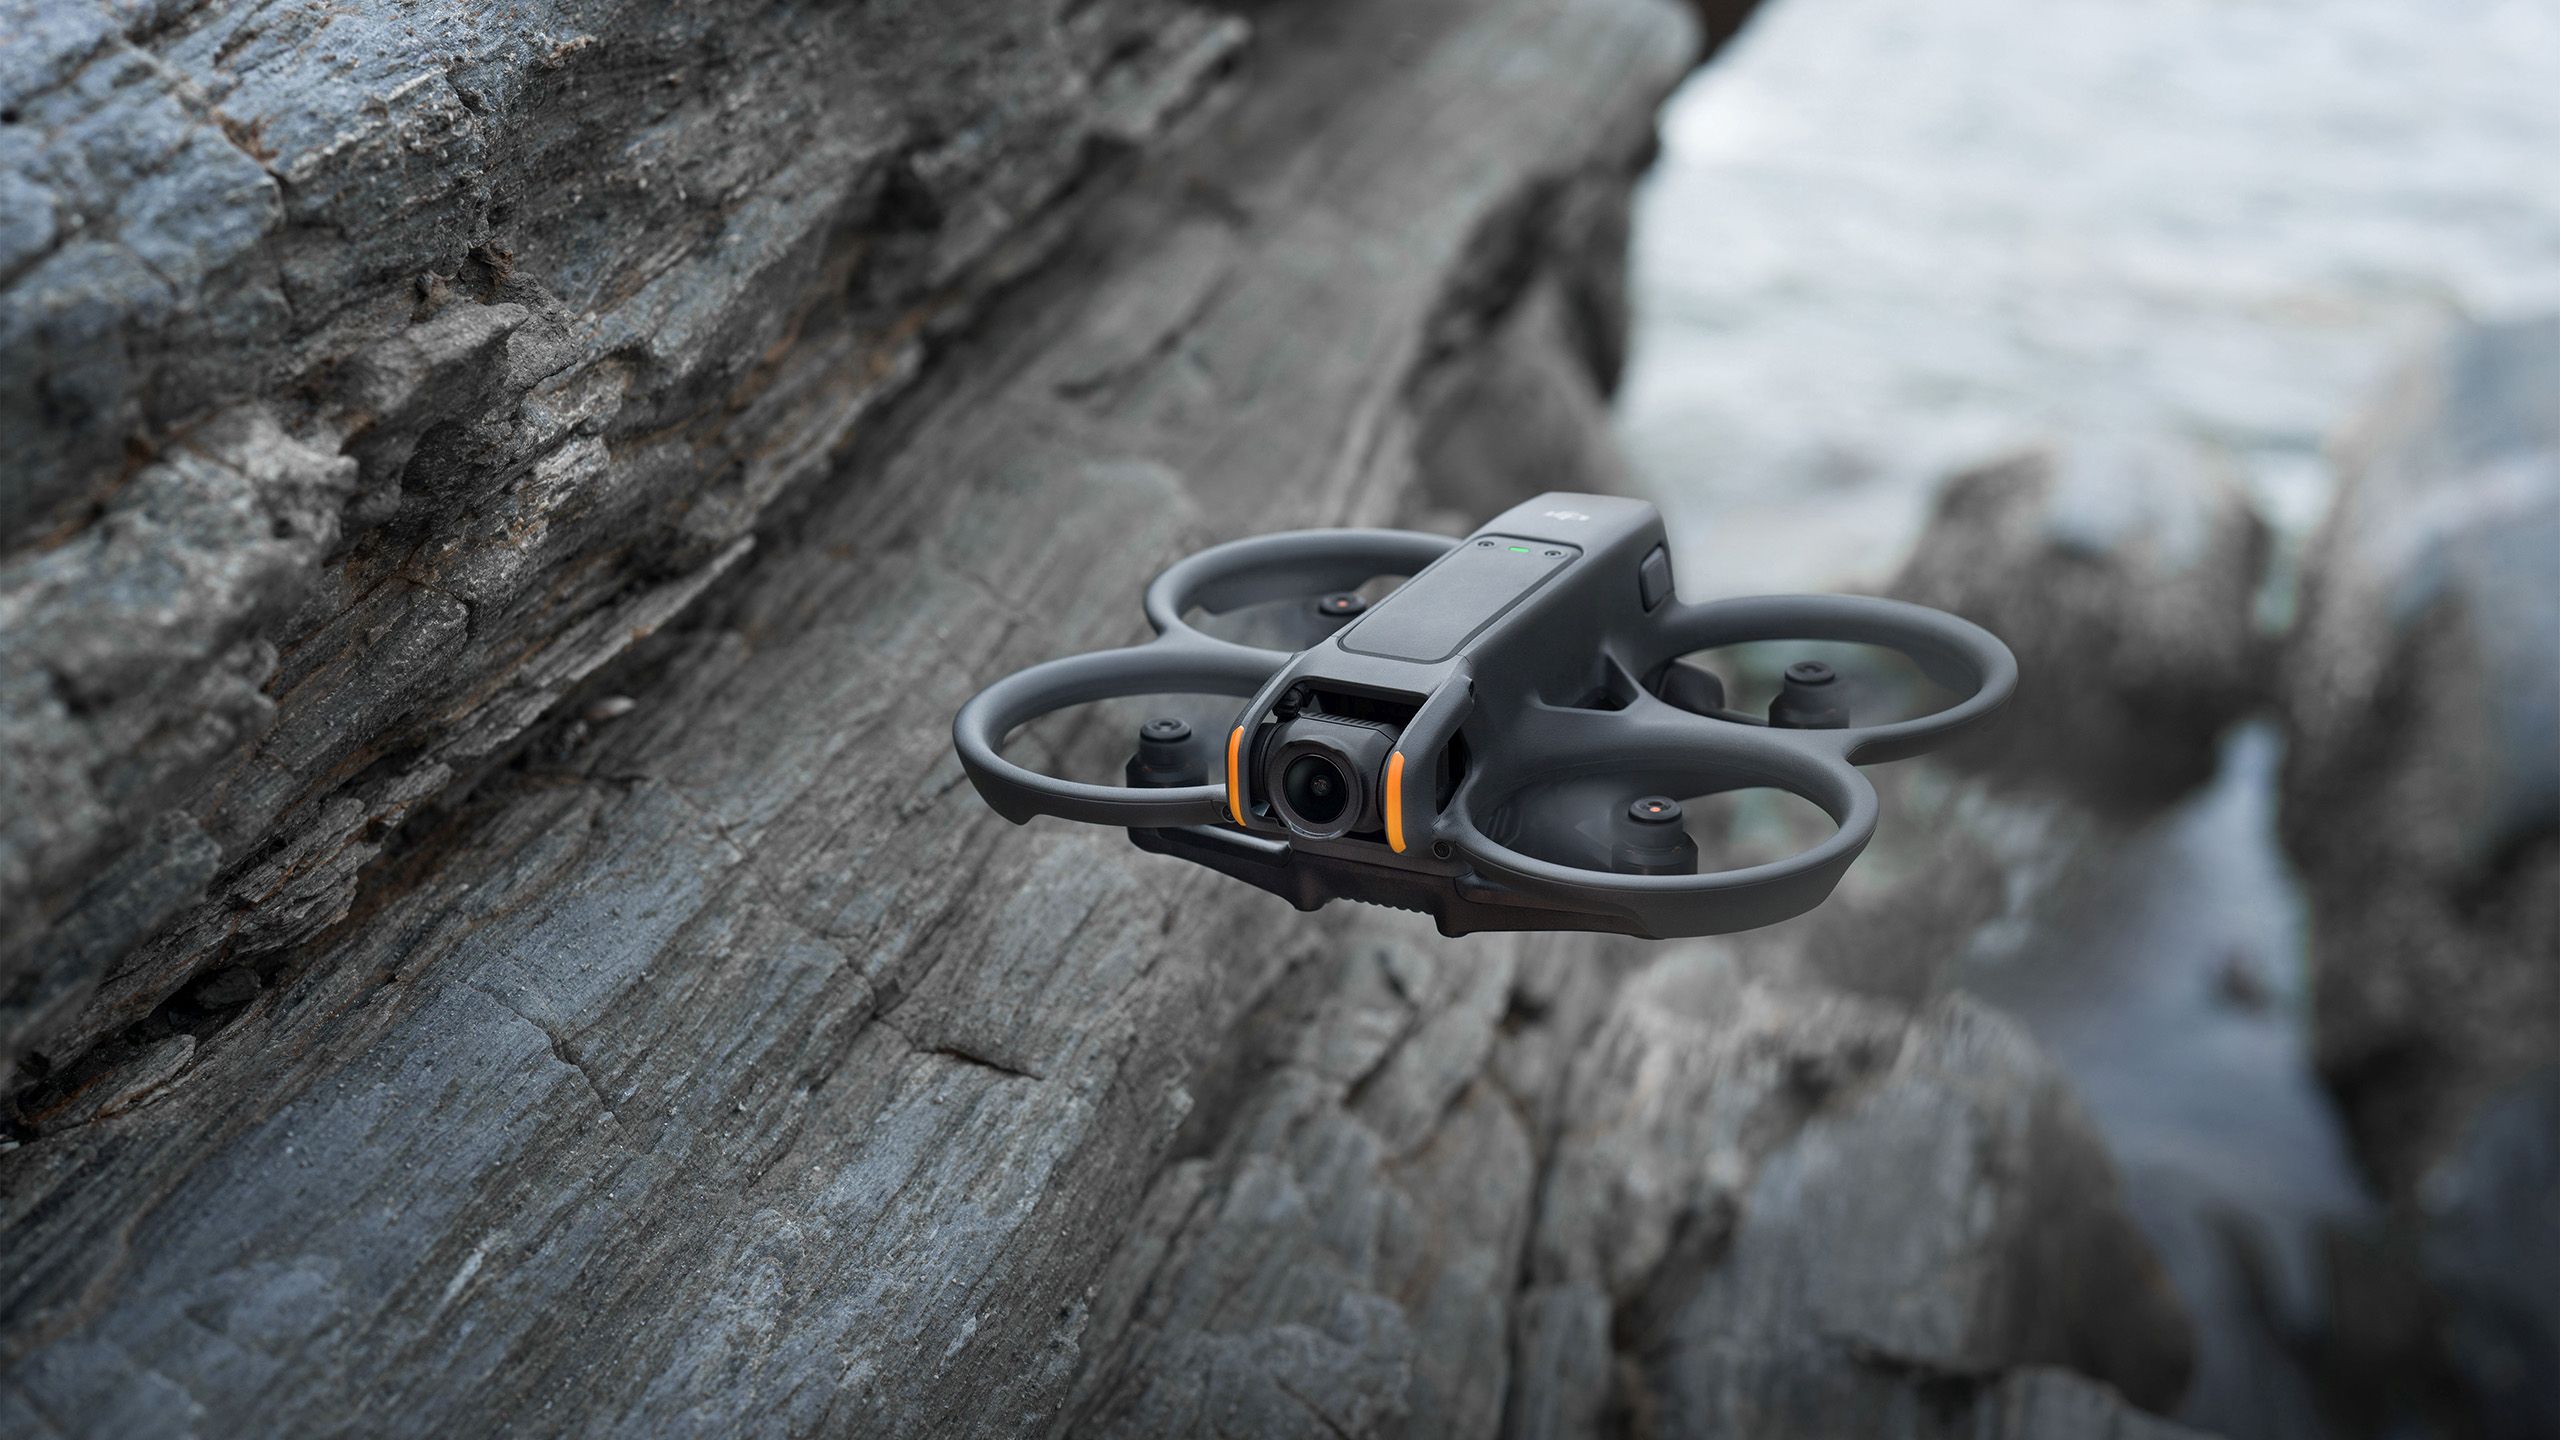 DJI's Avata 2 drone adds more flight tricks, better video, and enhanced safety